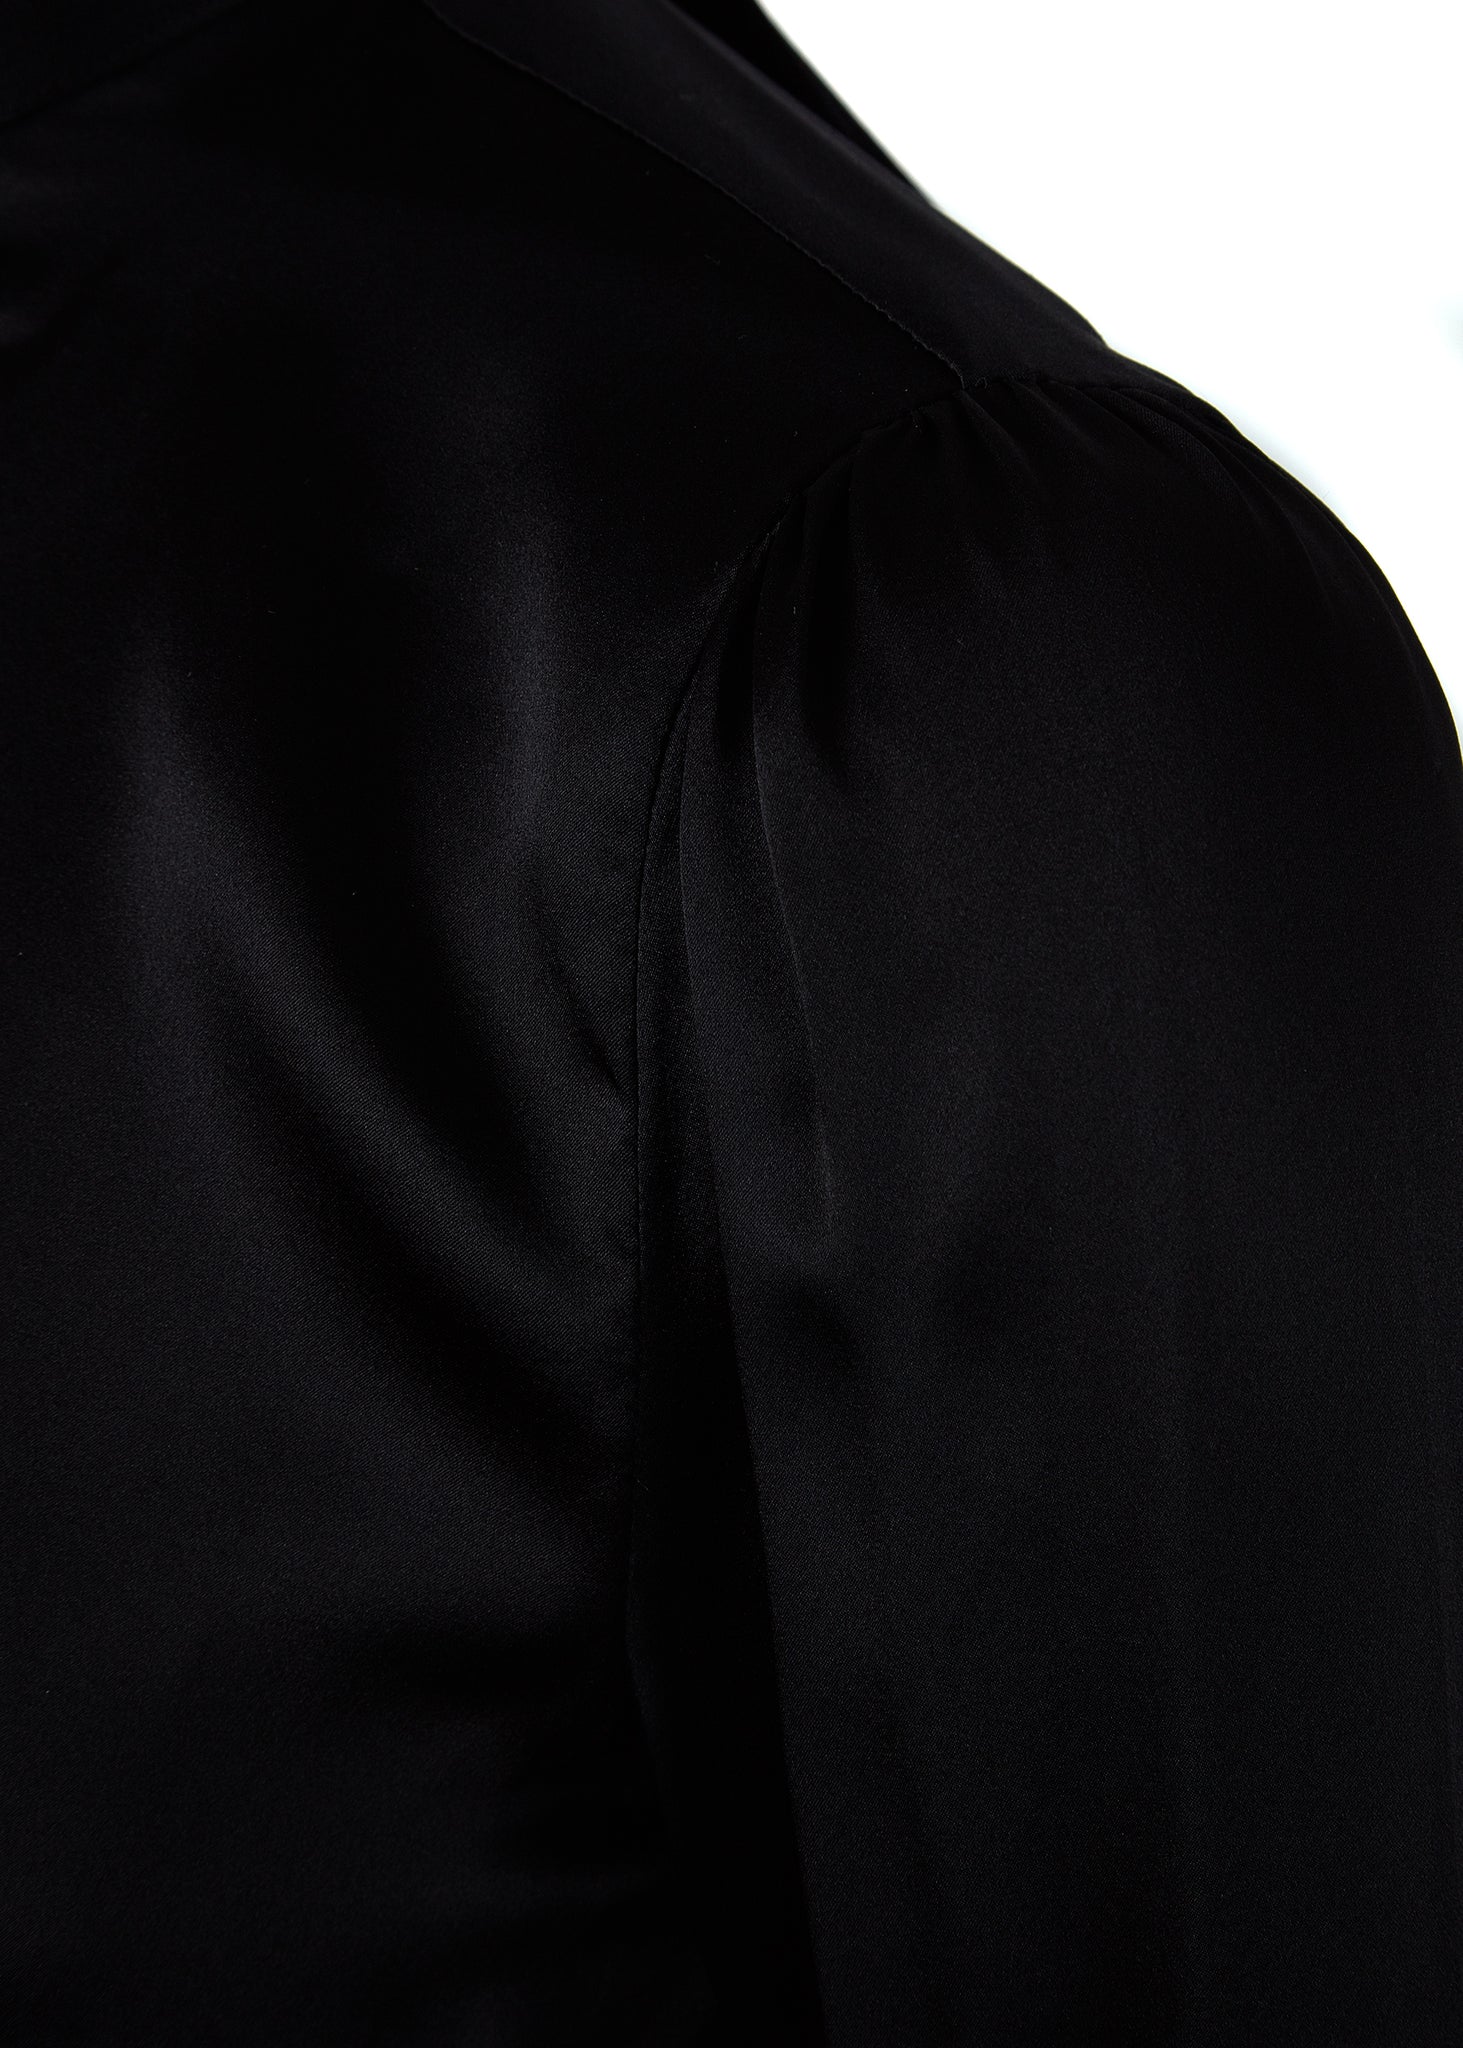 shoulder detail on womens black long sleeve silk blouse with neck tie and gold hardware